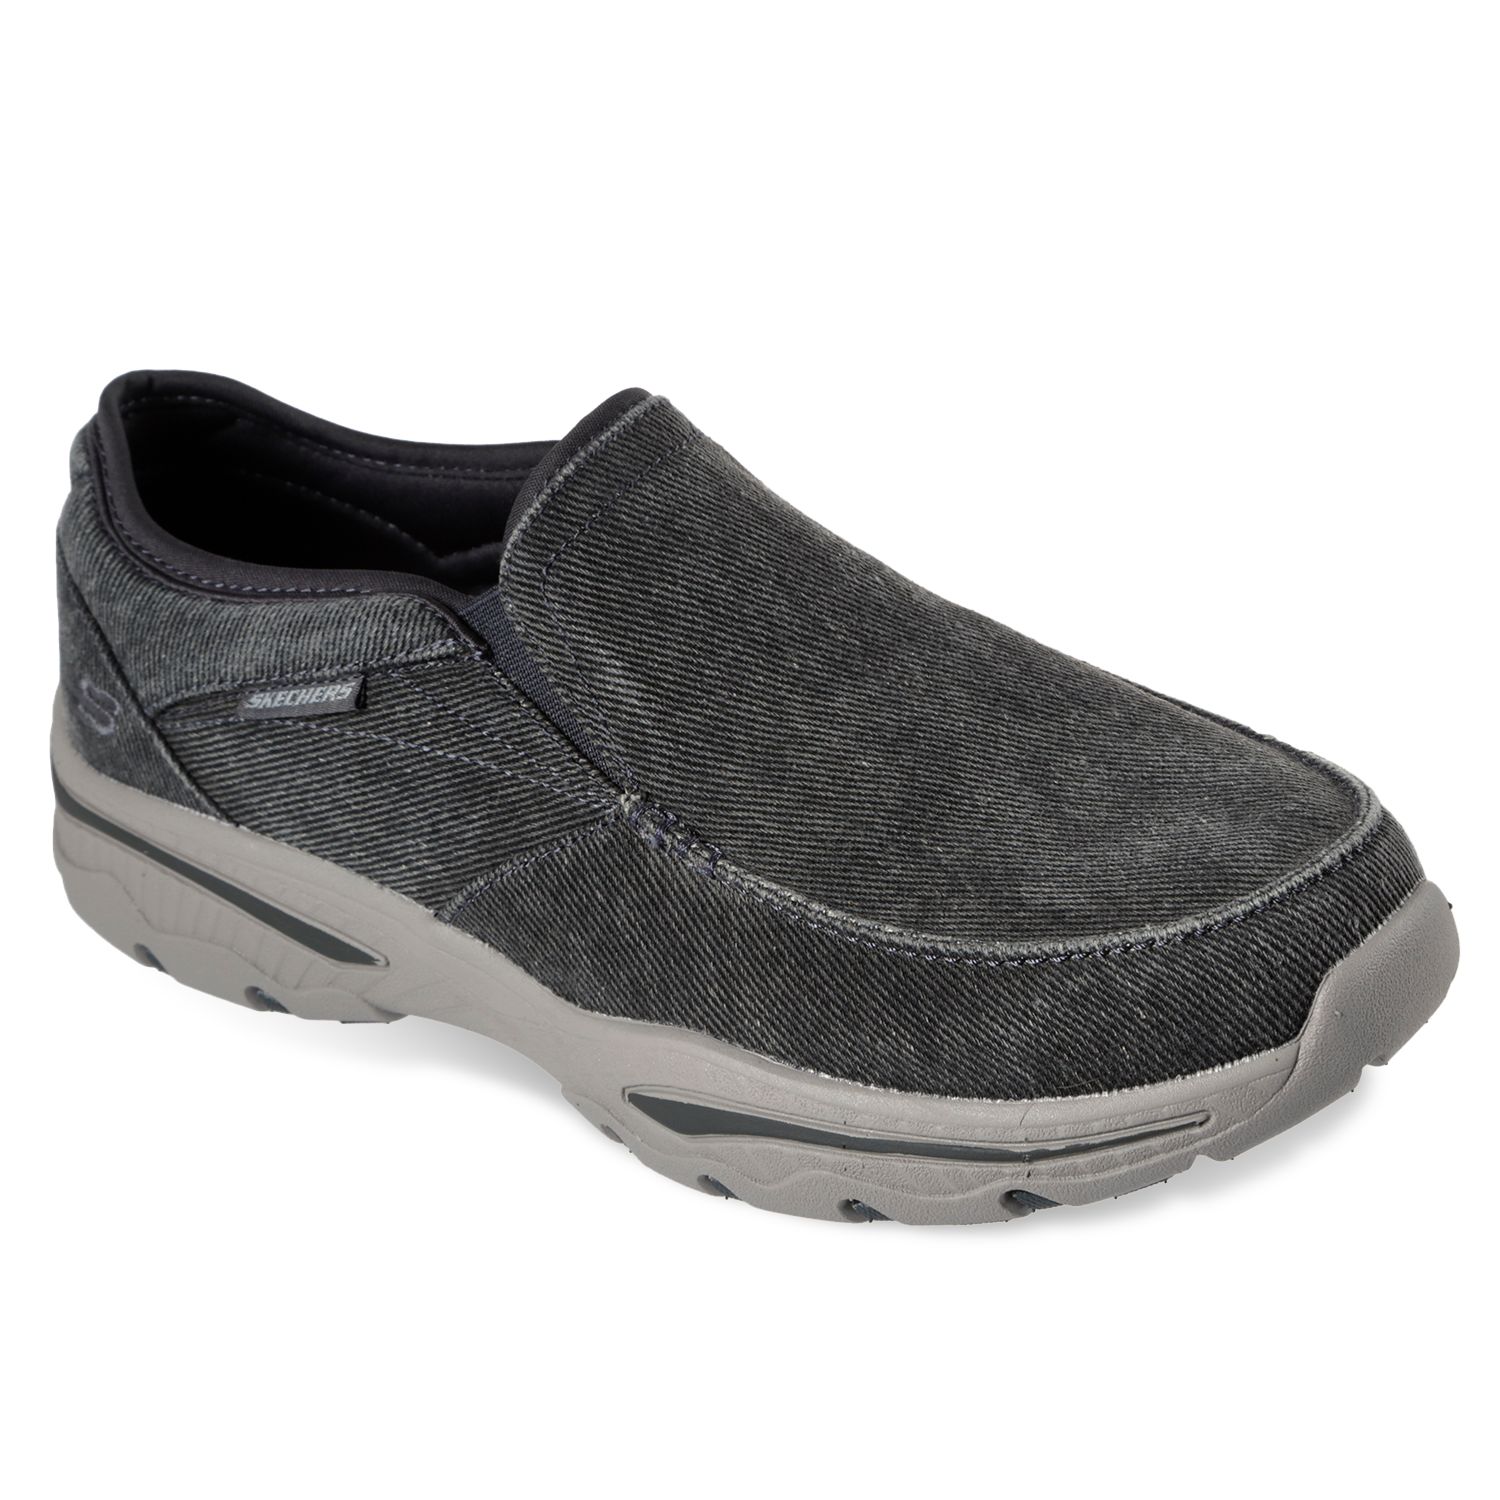 men's casual shoes at kohl's